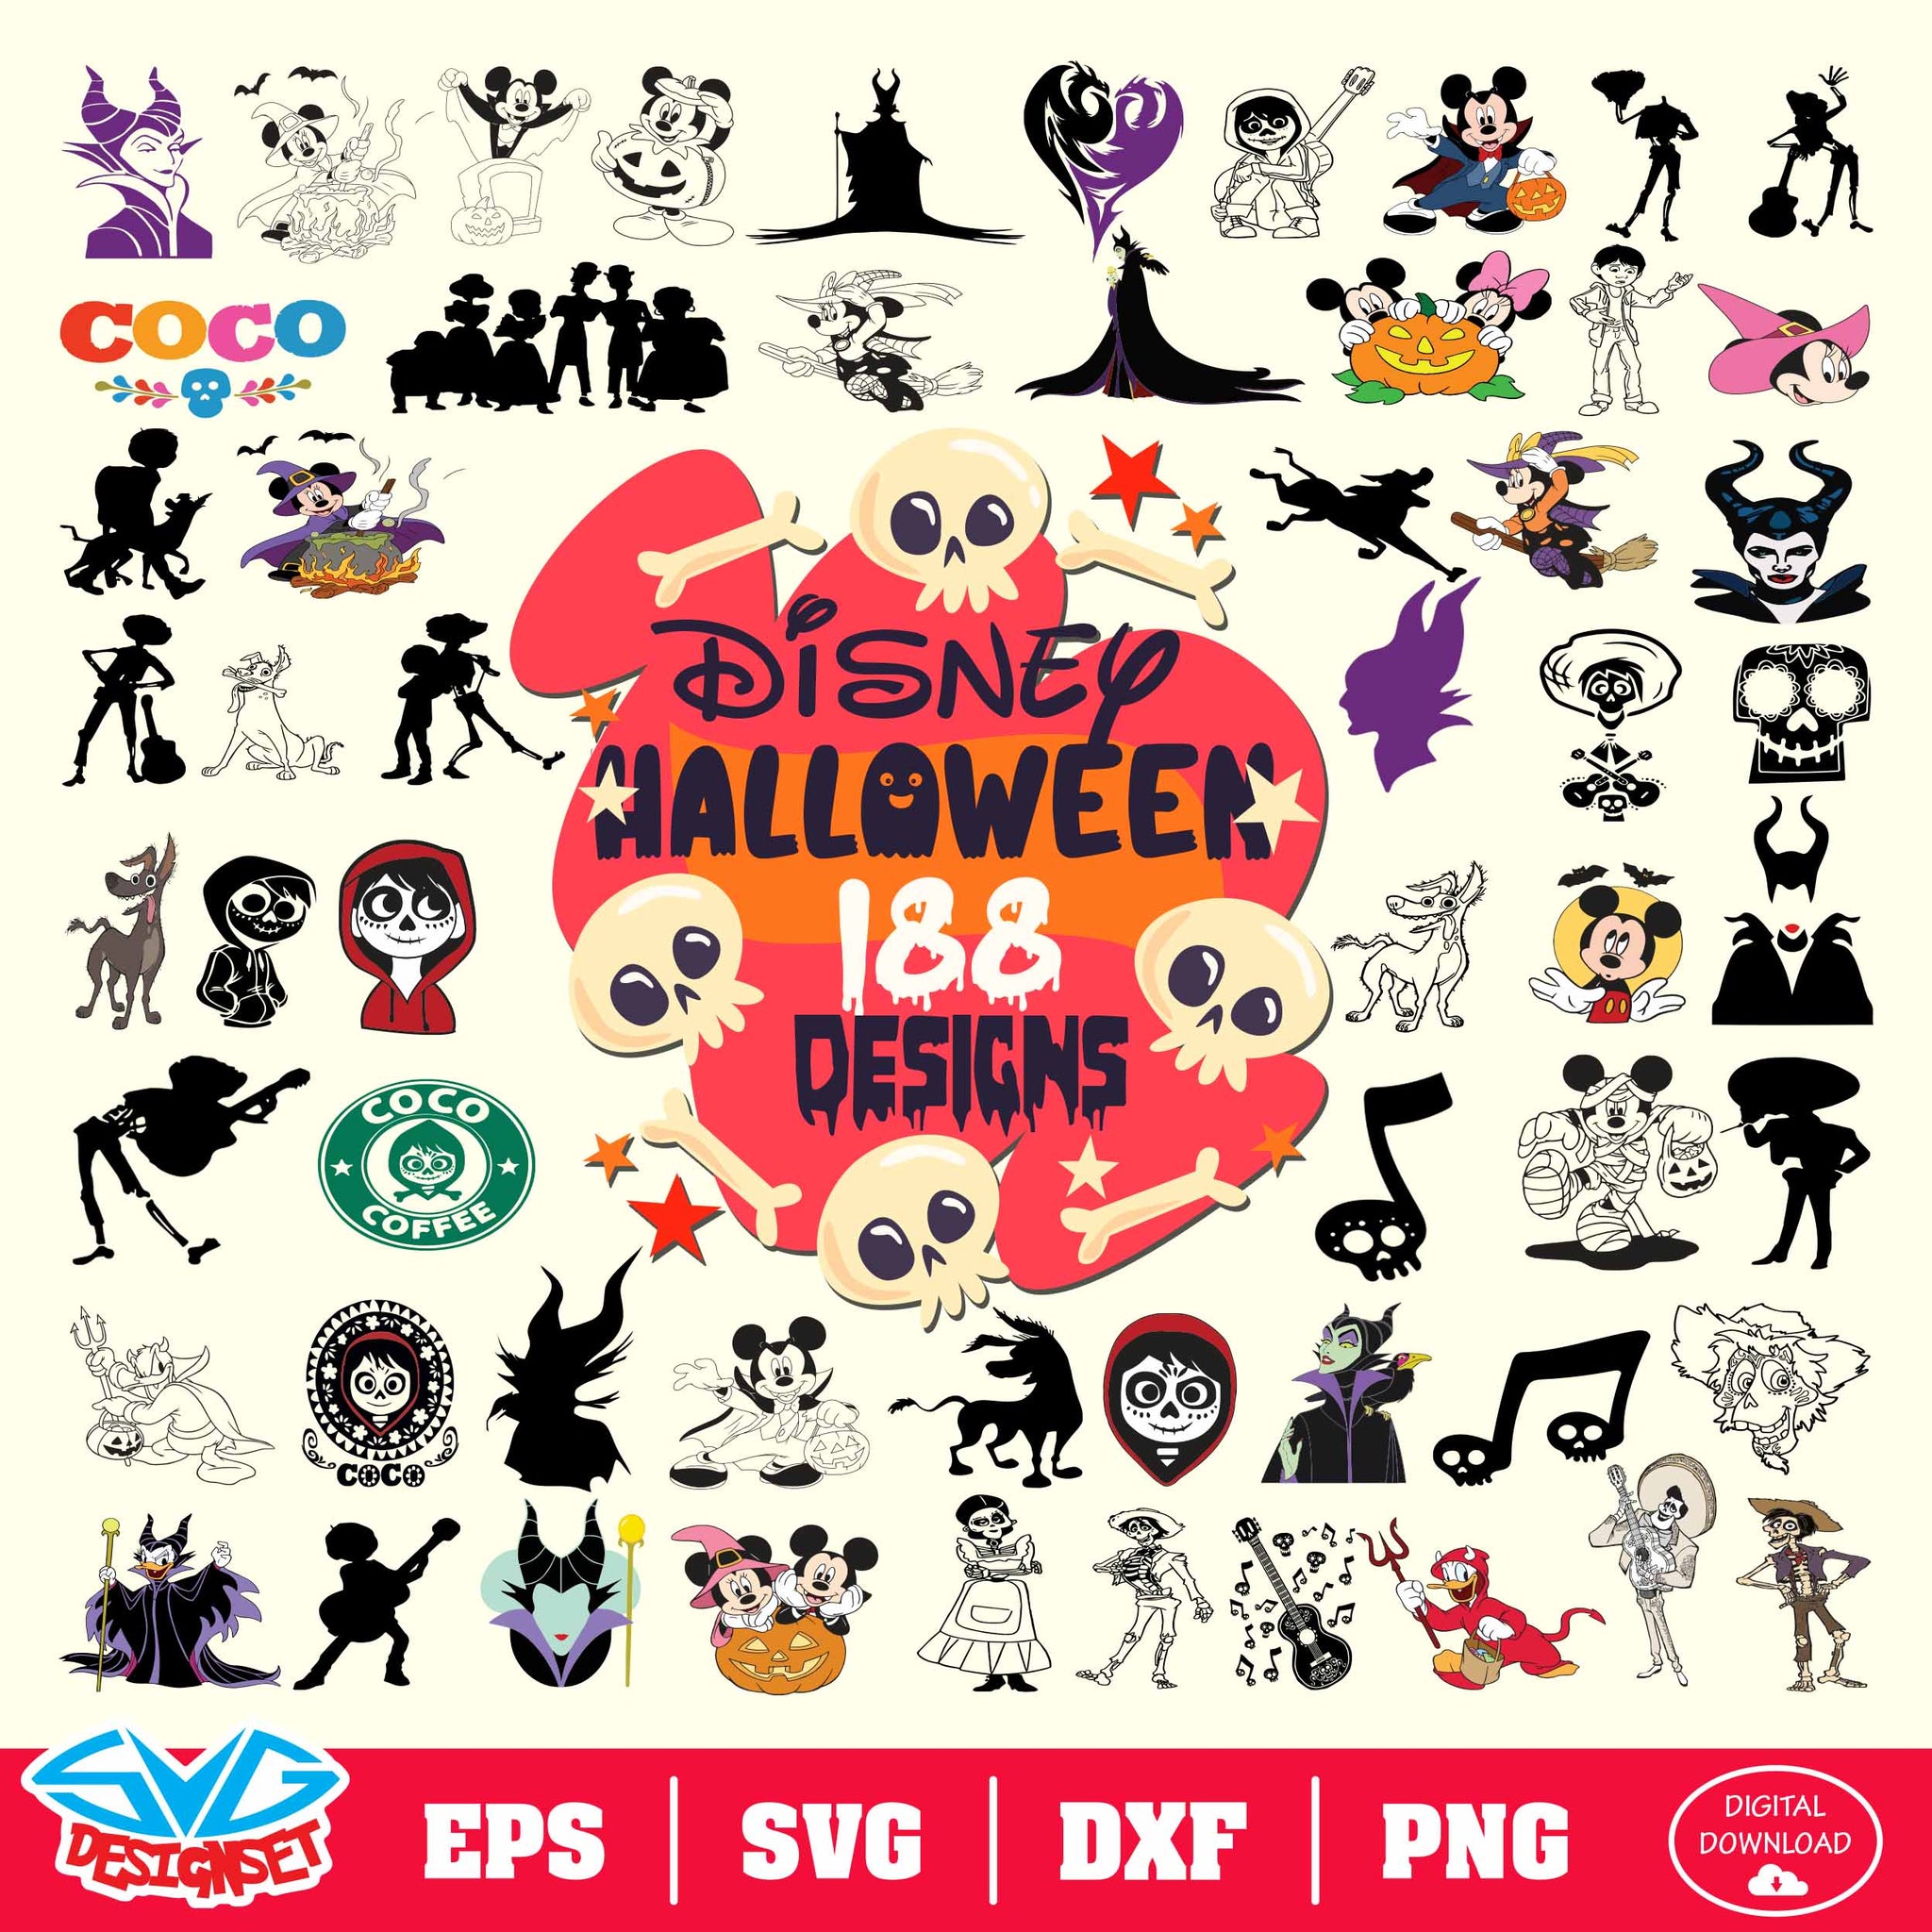 Disney Halloween Svg, Dxf, Eps, Png, Clipart, Silhouette and Cutfiles #02 - SVGDesignSets